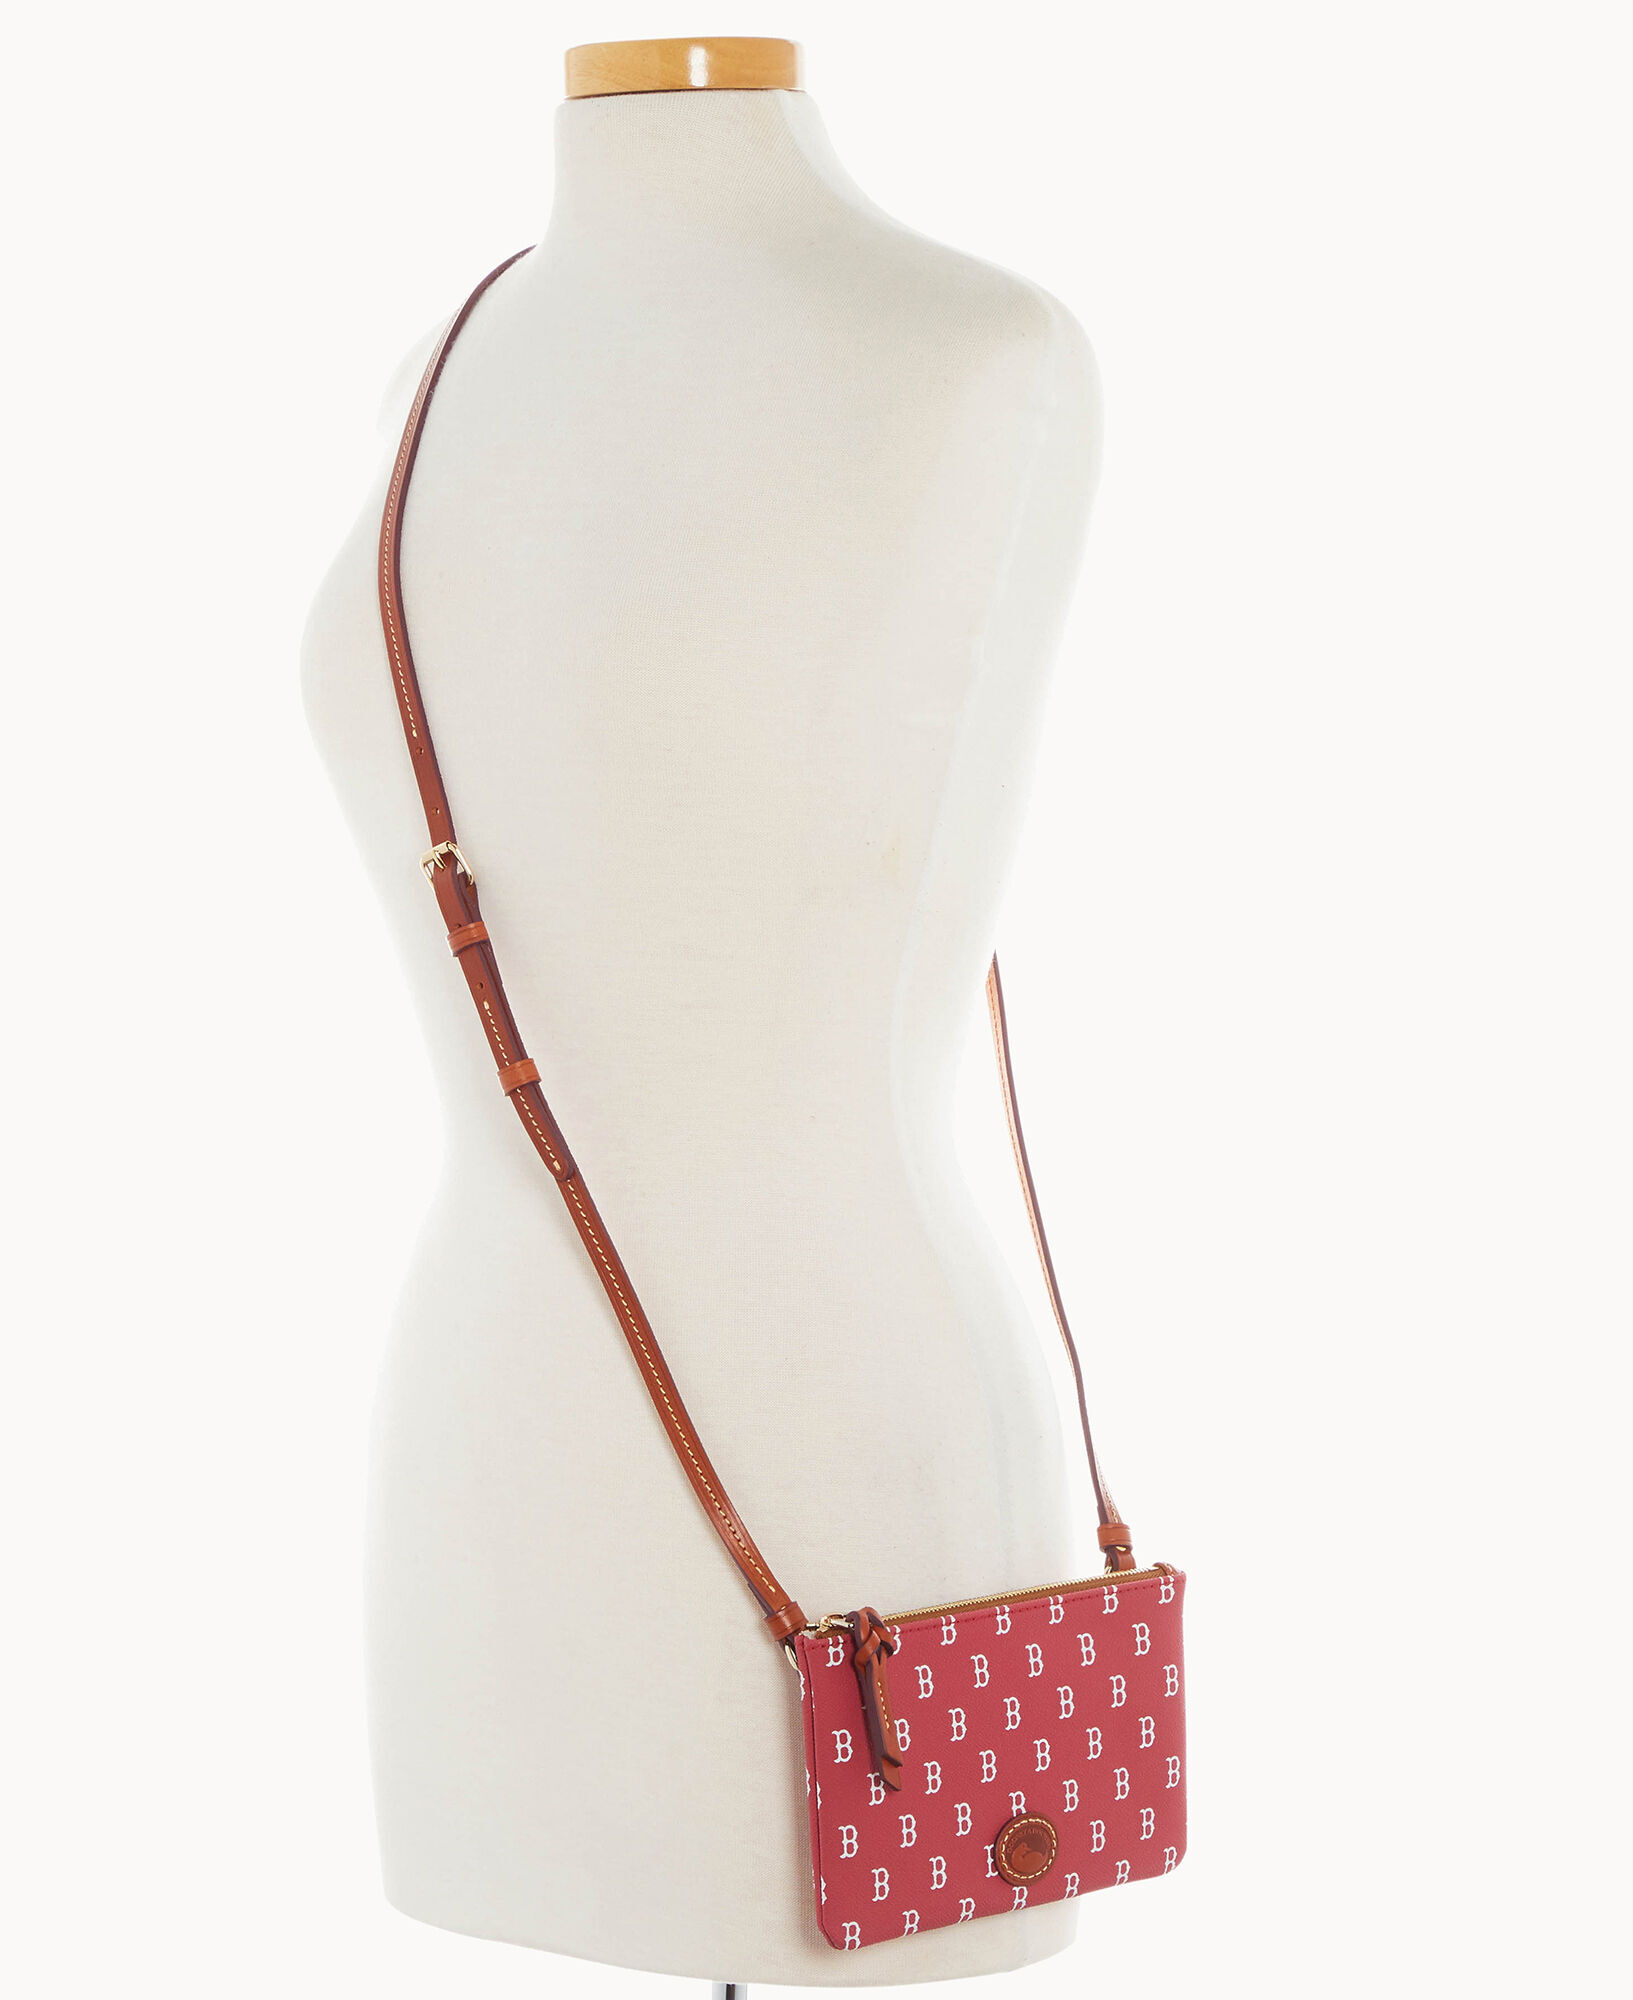 Dooney & Bourke Boston Red Sox Large Tote